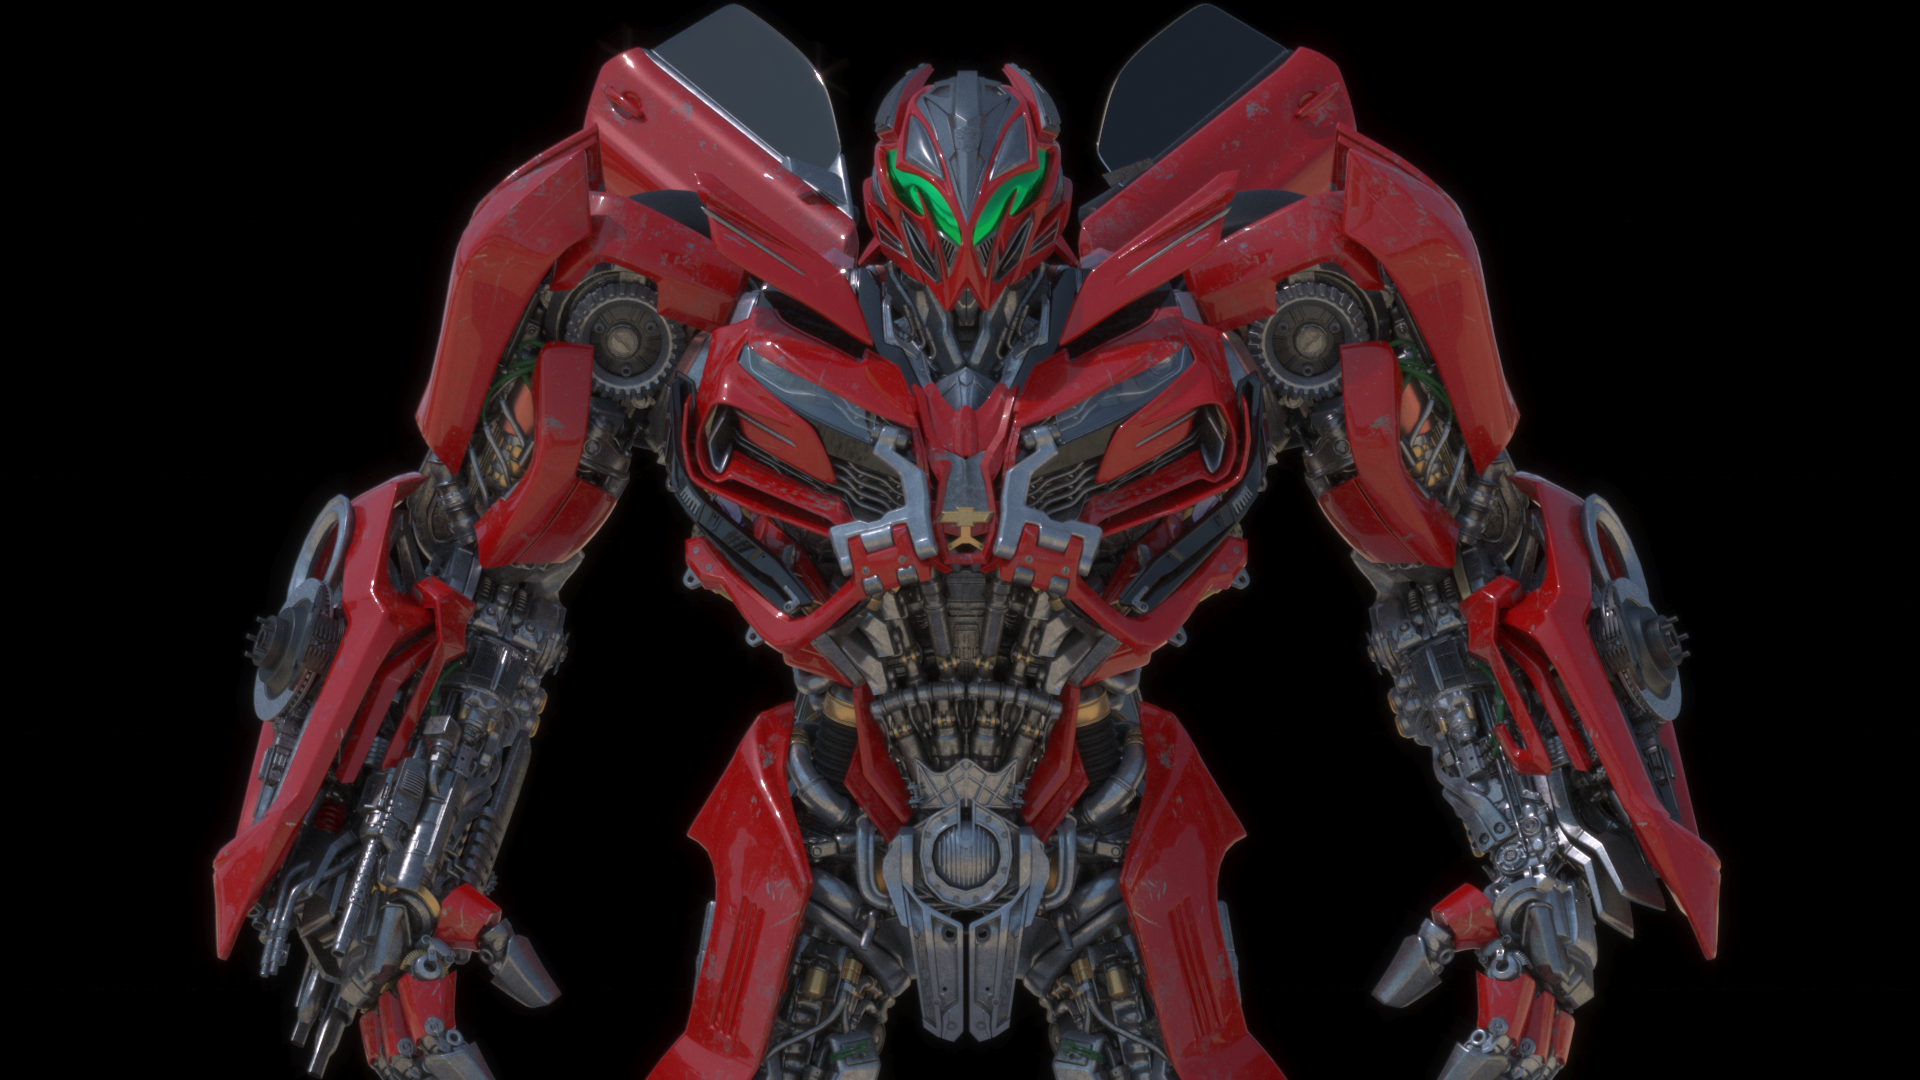 Inside3D is creating HD 3D models and CGI resources. Patreon. Transformers, Transformers artwork, Transformers design